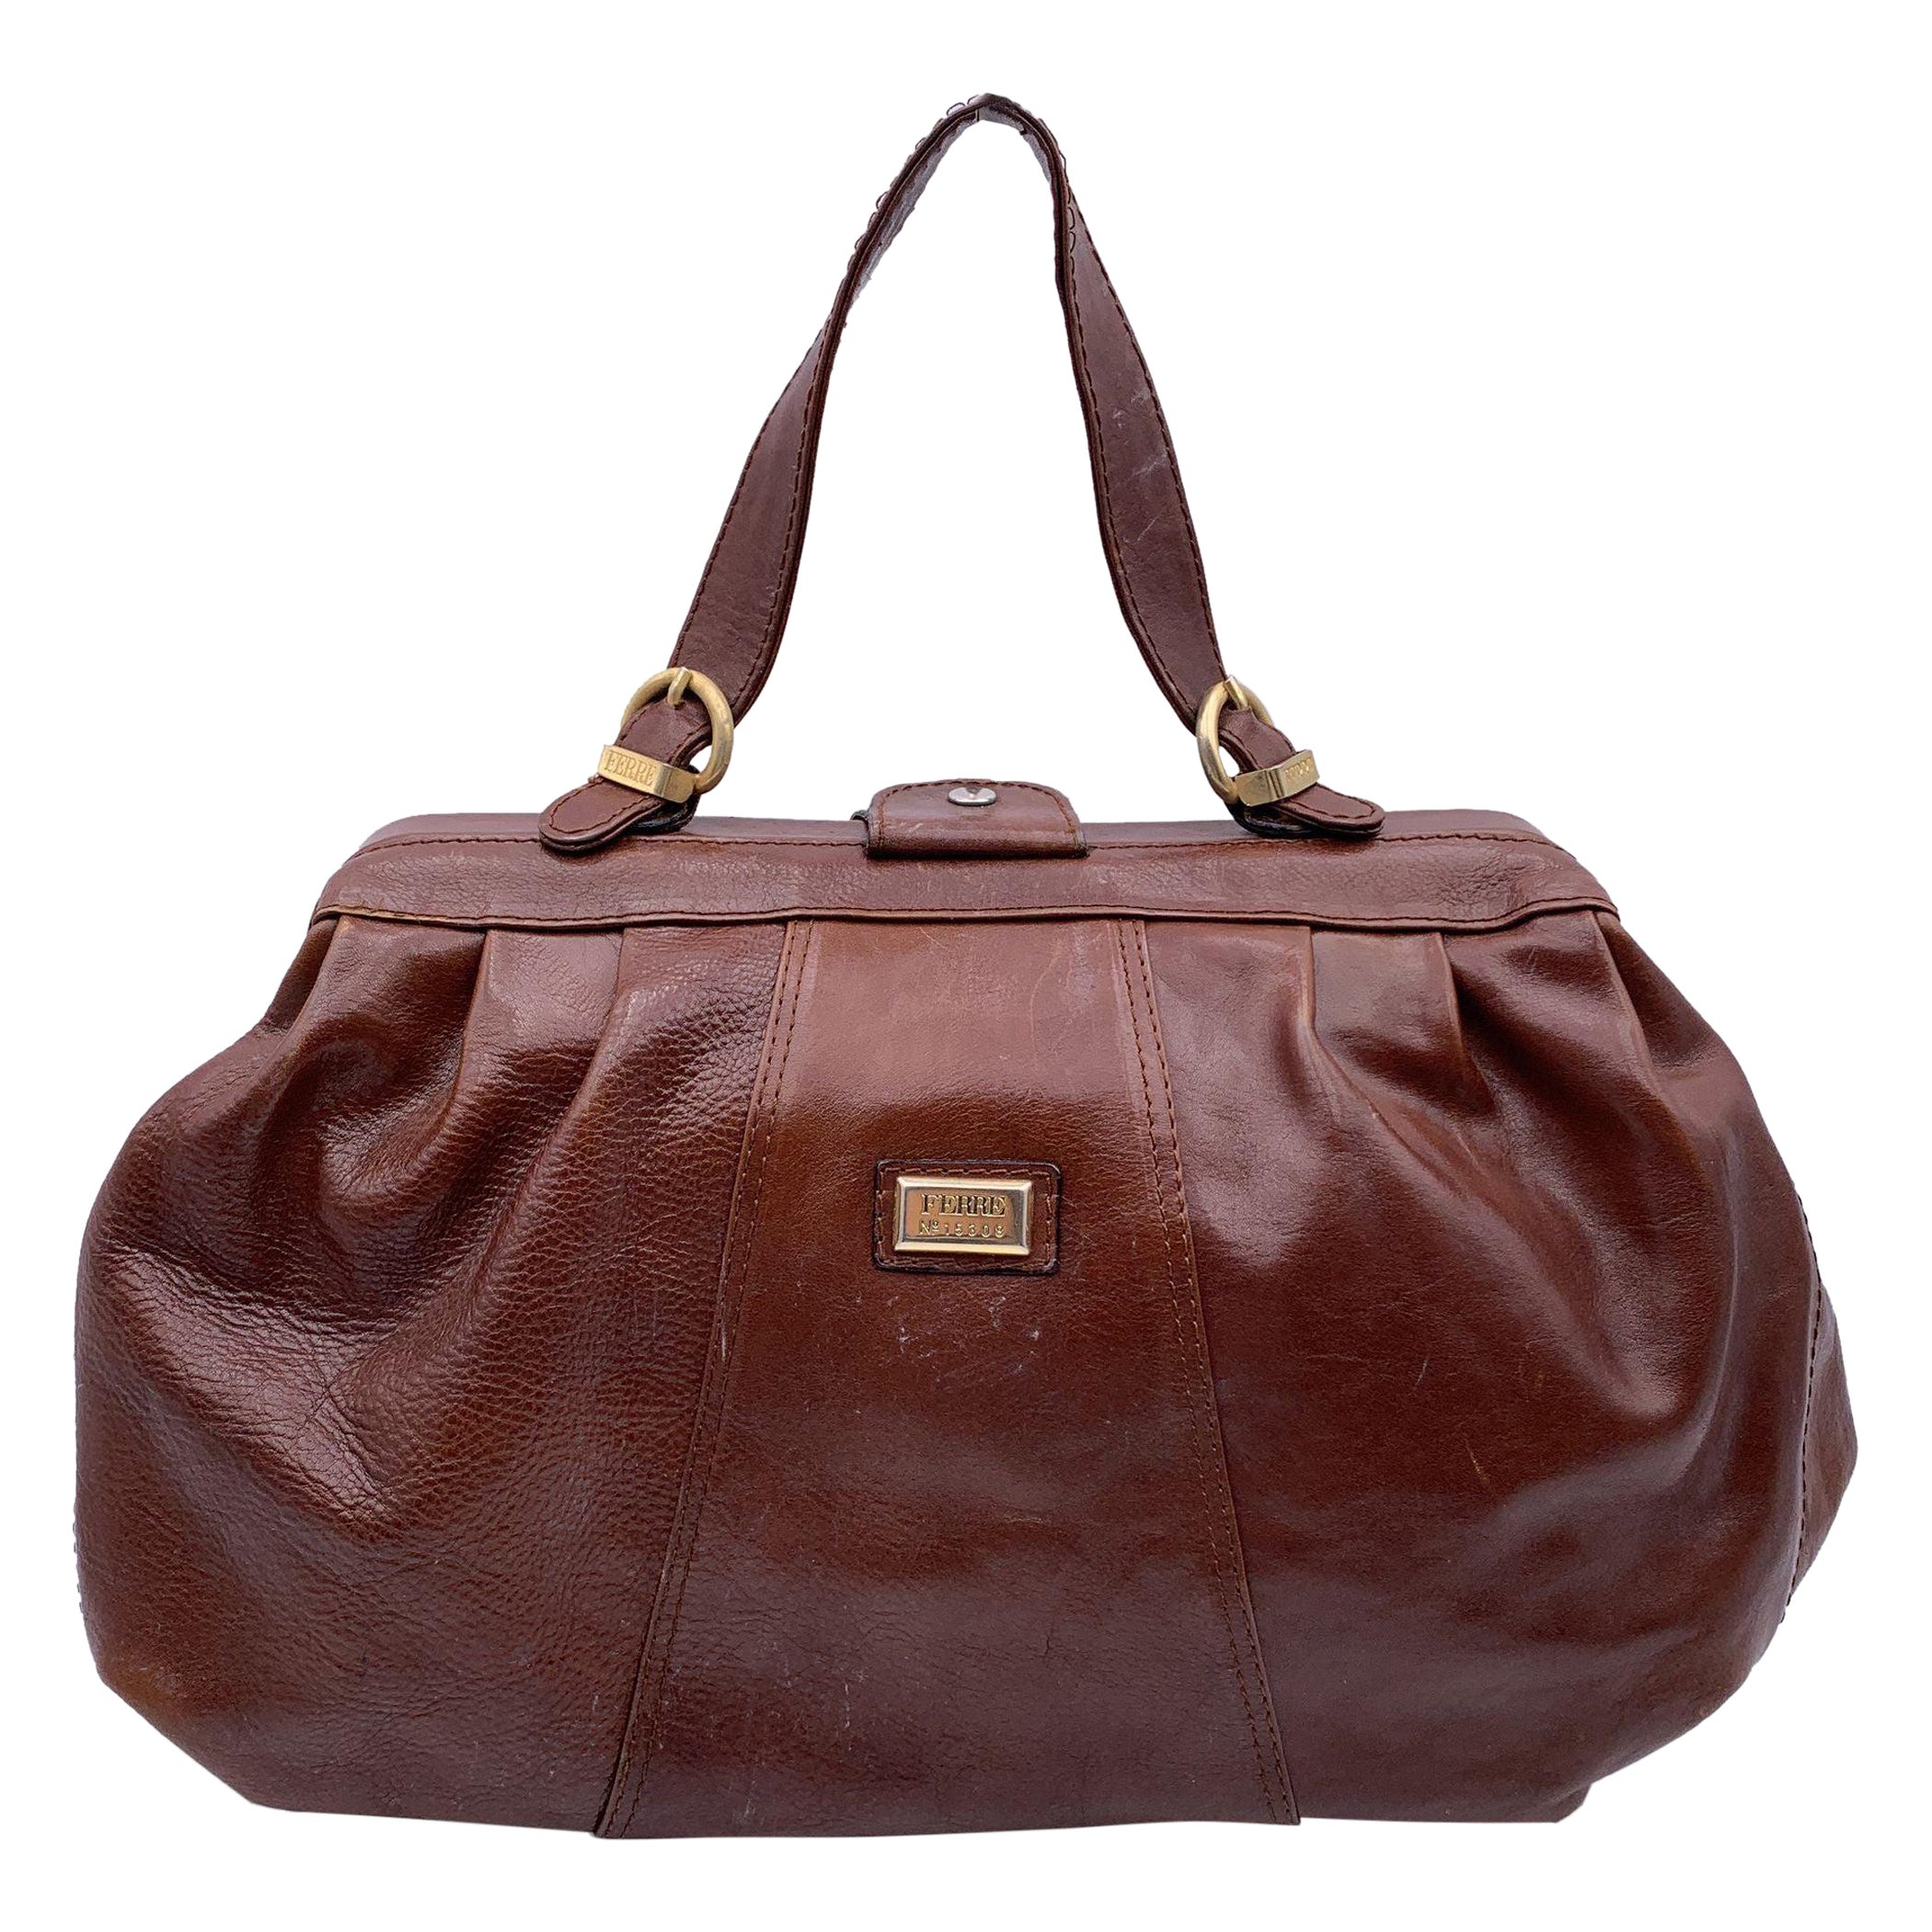 Gianfranco Ferre Vintage Brown Leather Doctor Bag Satchel with Strap For Sale